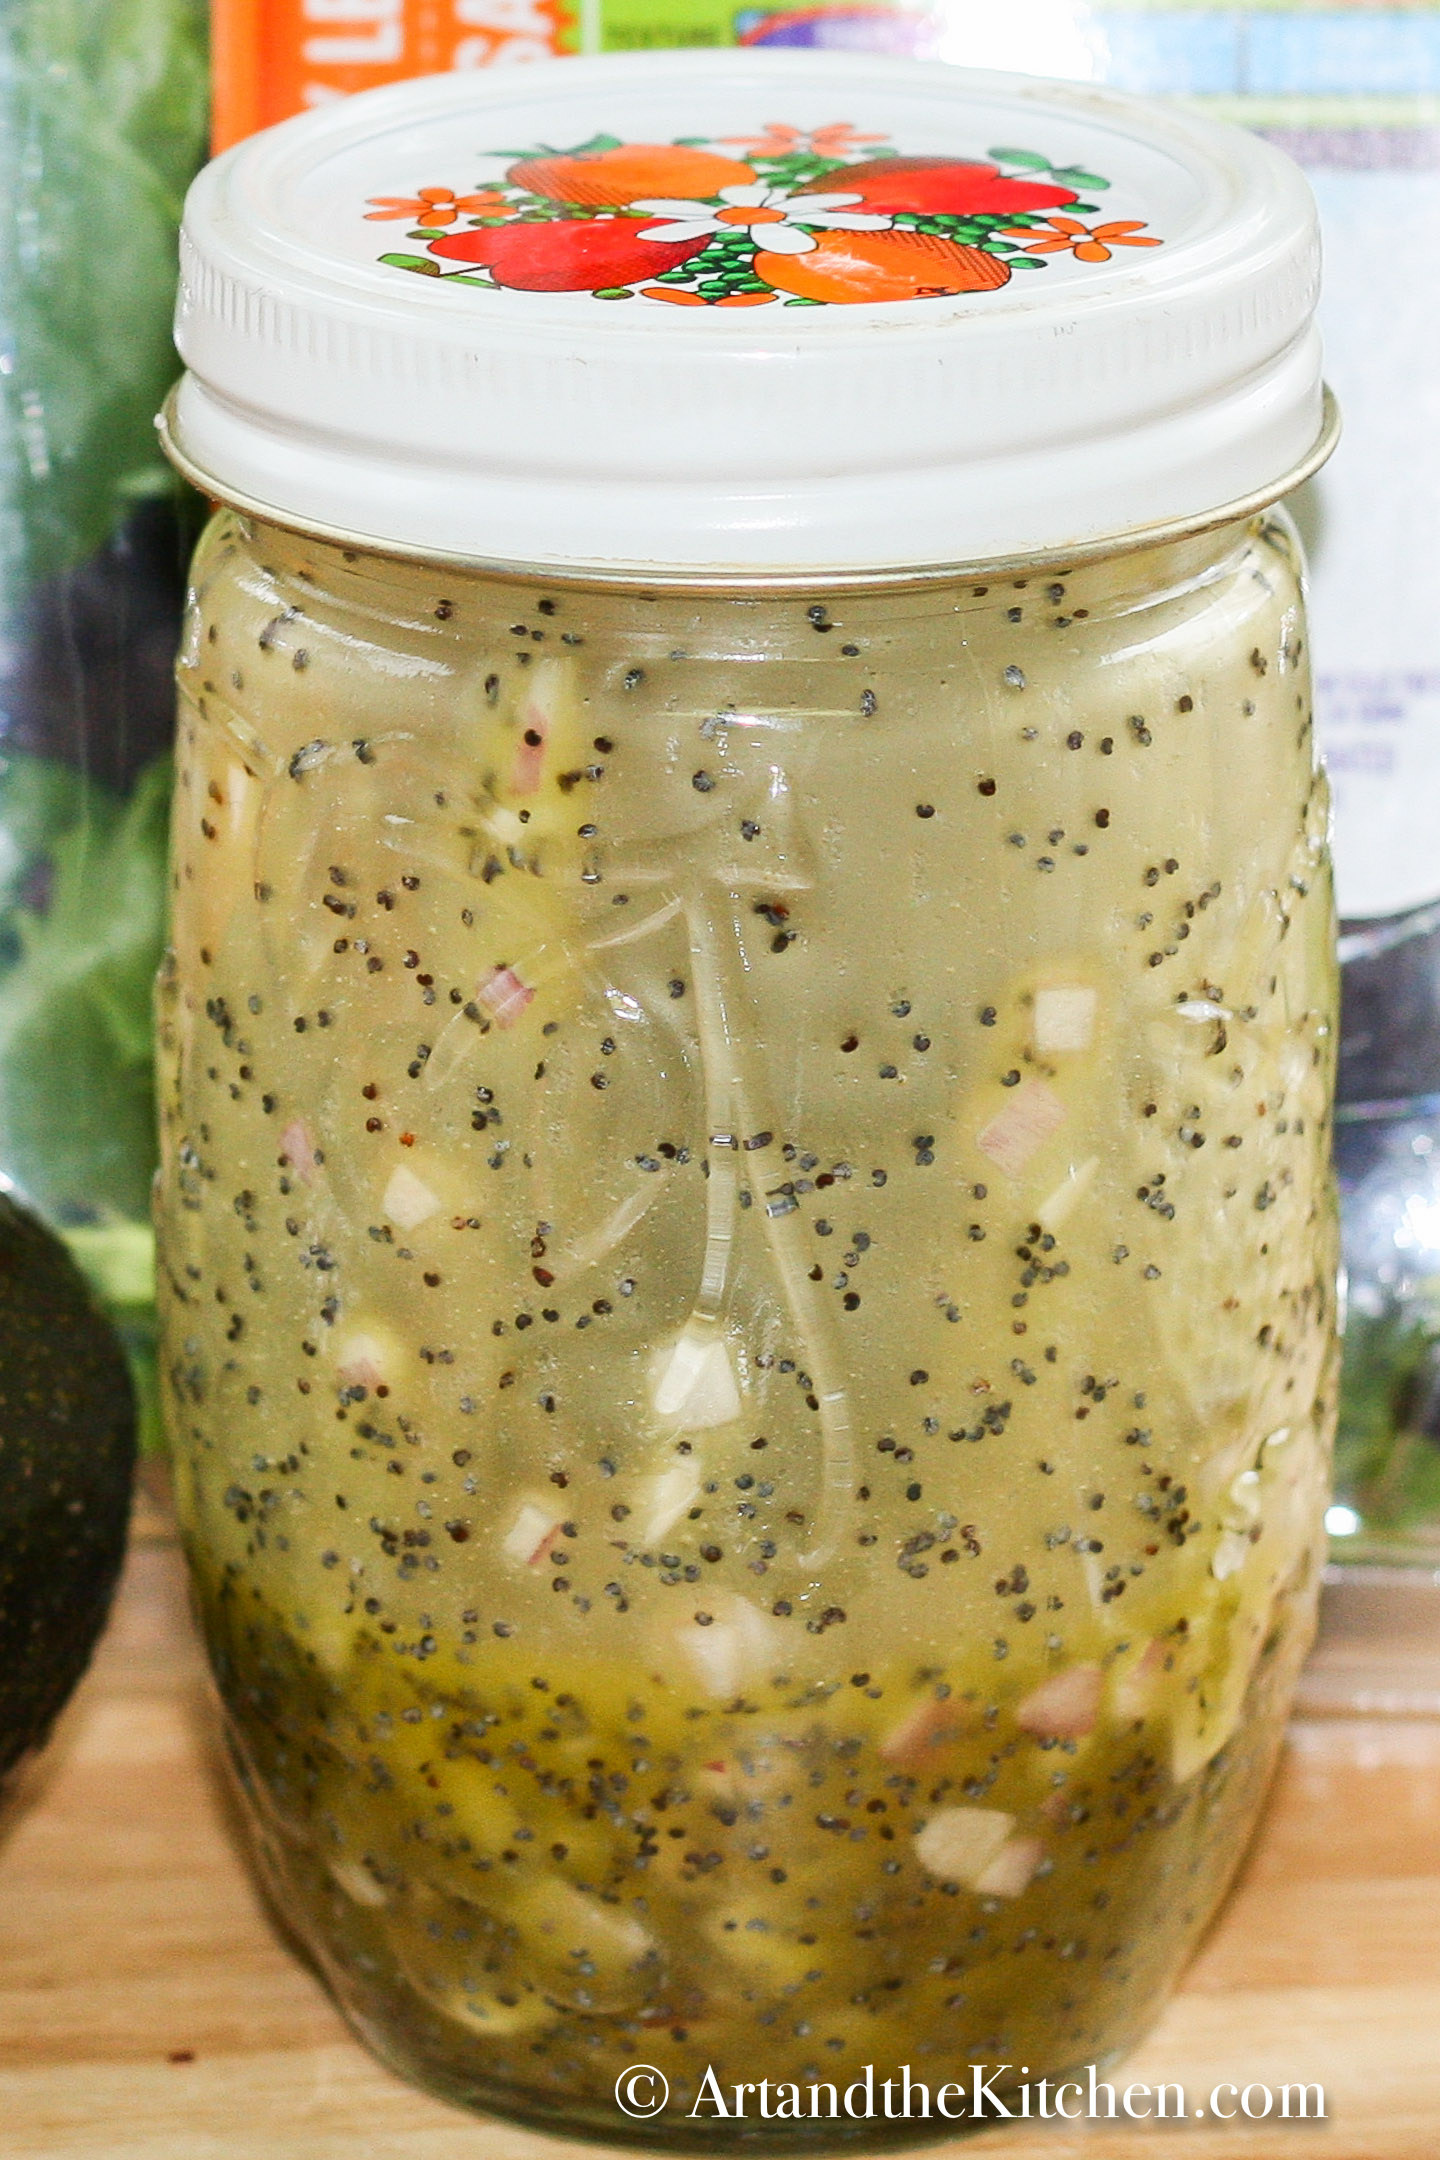 A small glass jar filled with homemade poppyseed dressing.